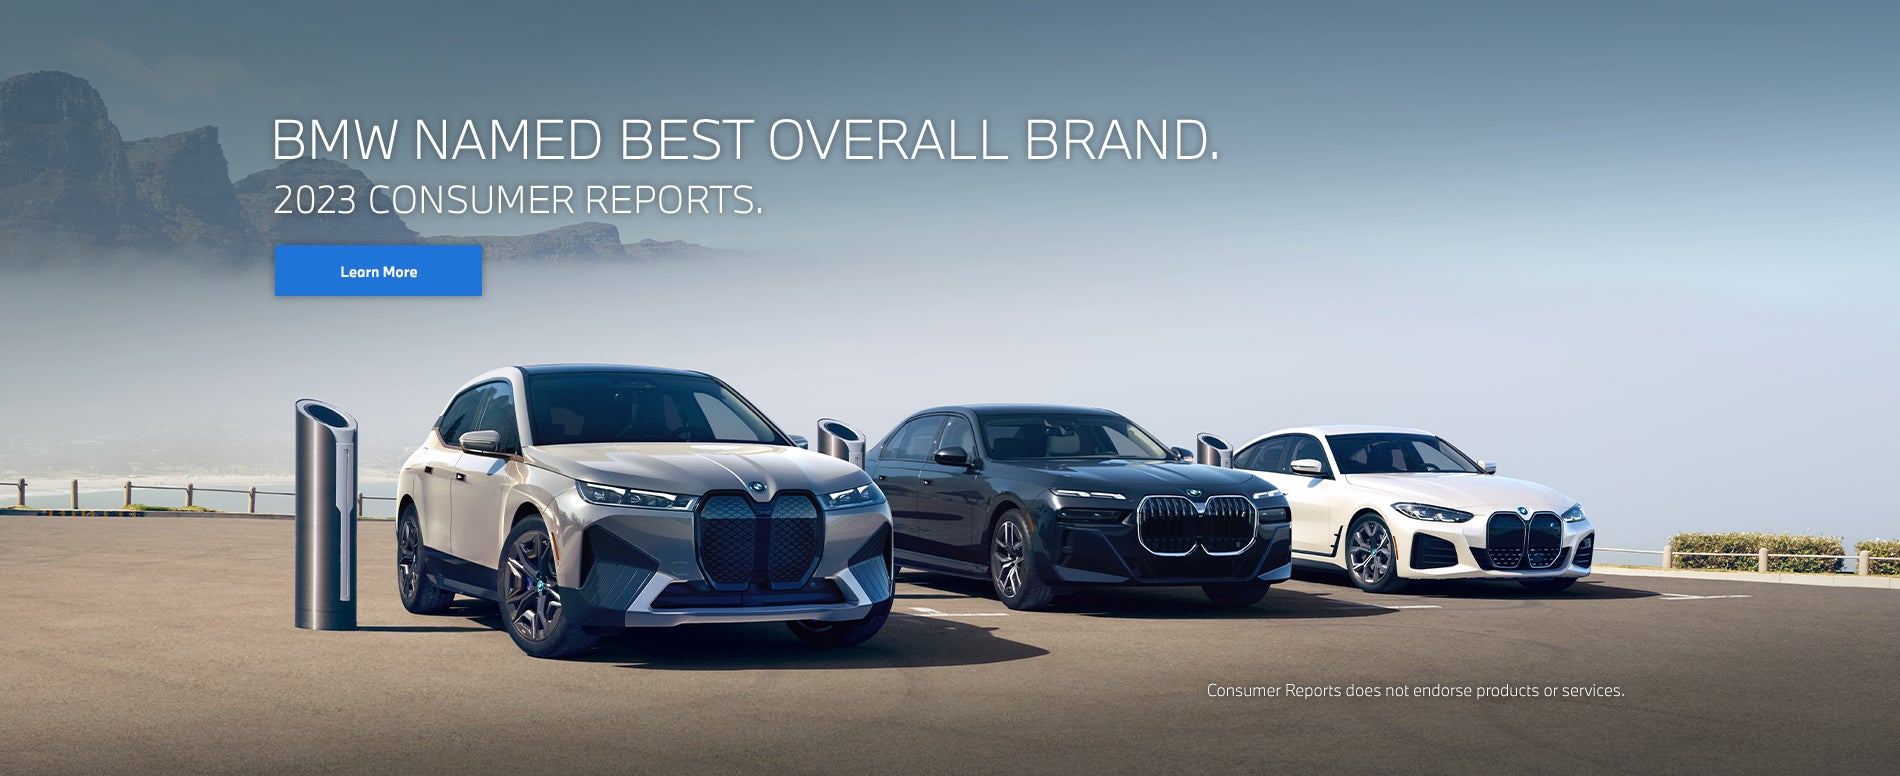 BMW Named Best Overall Brand